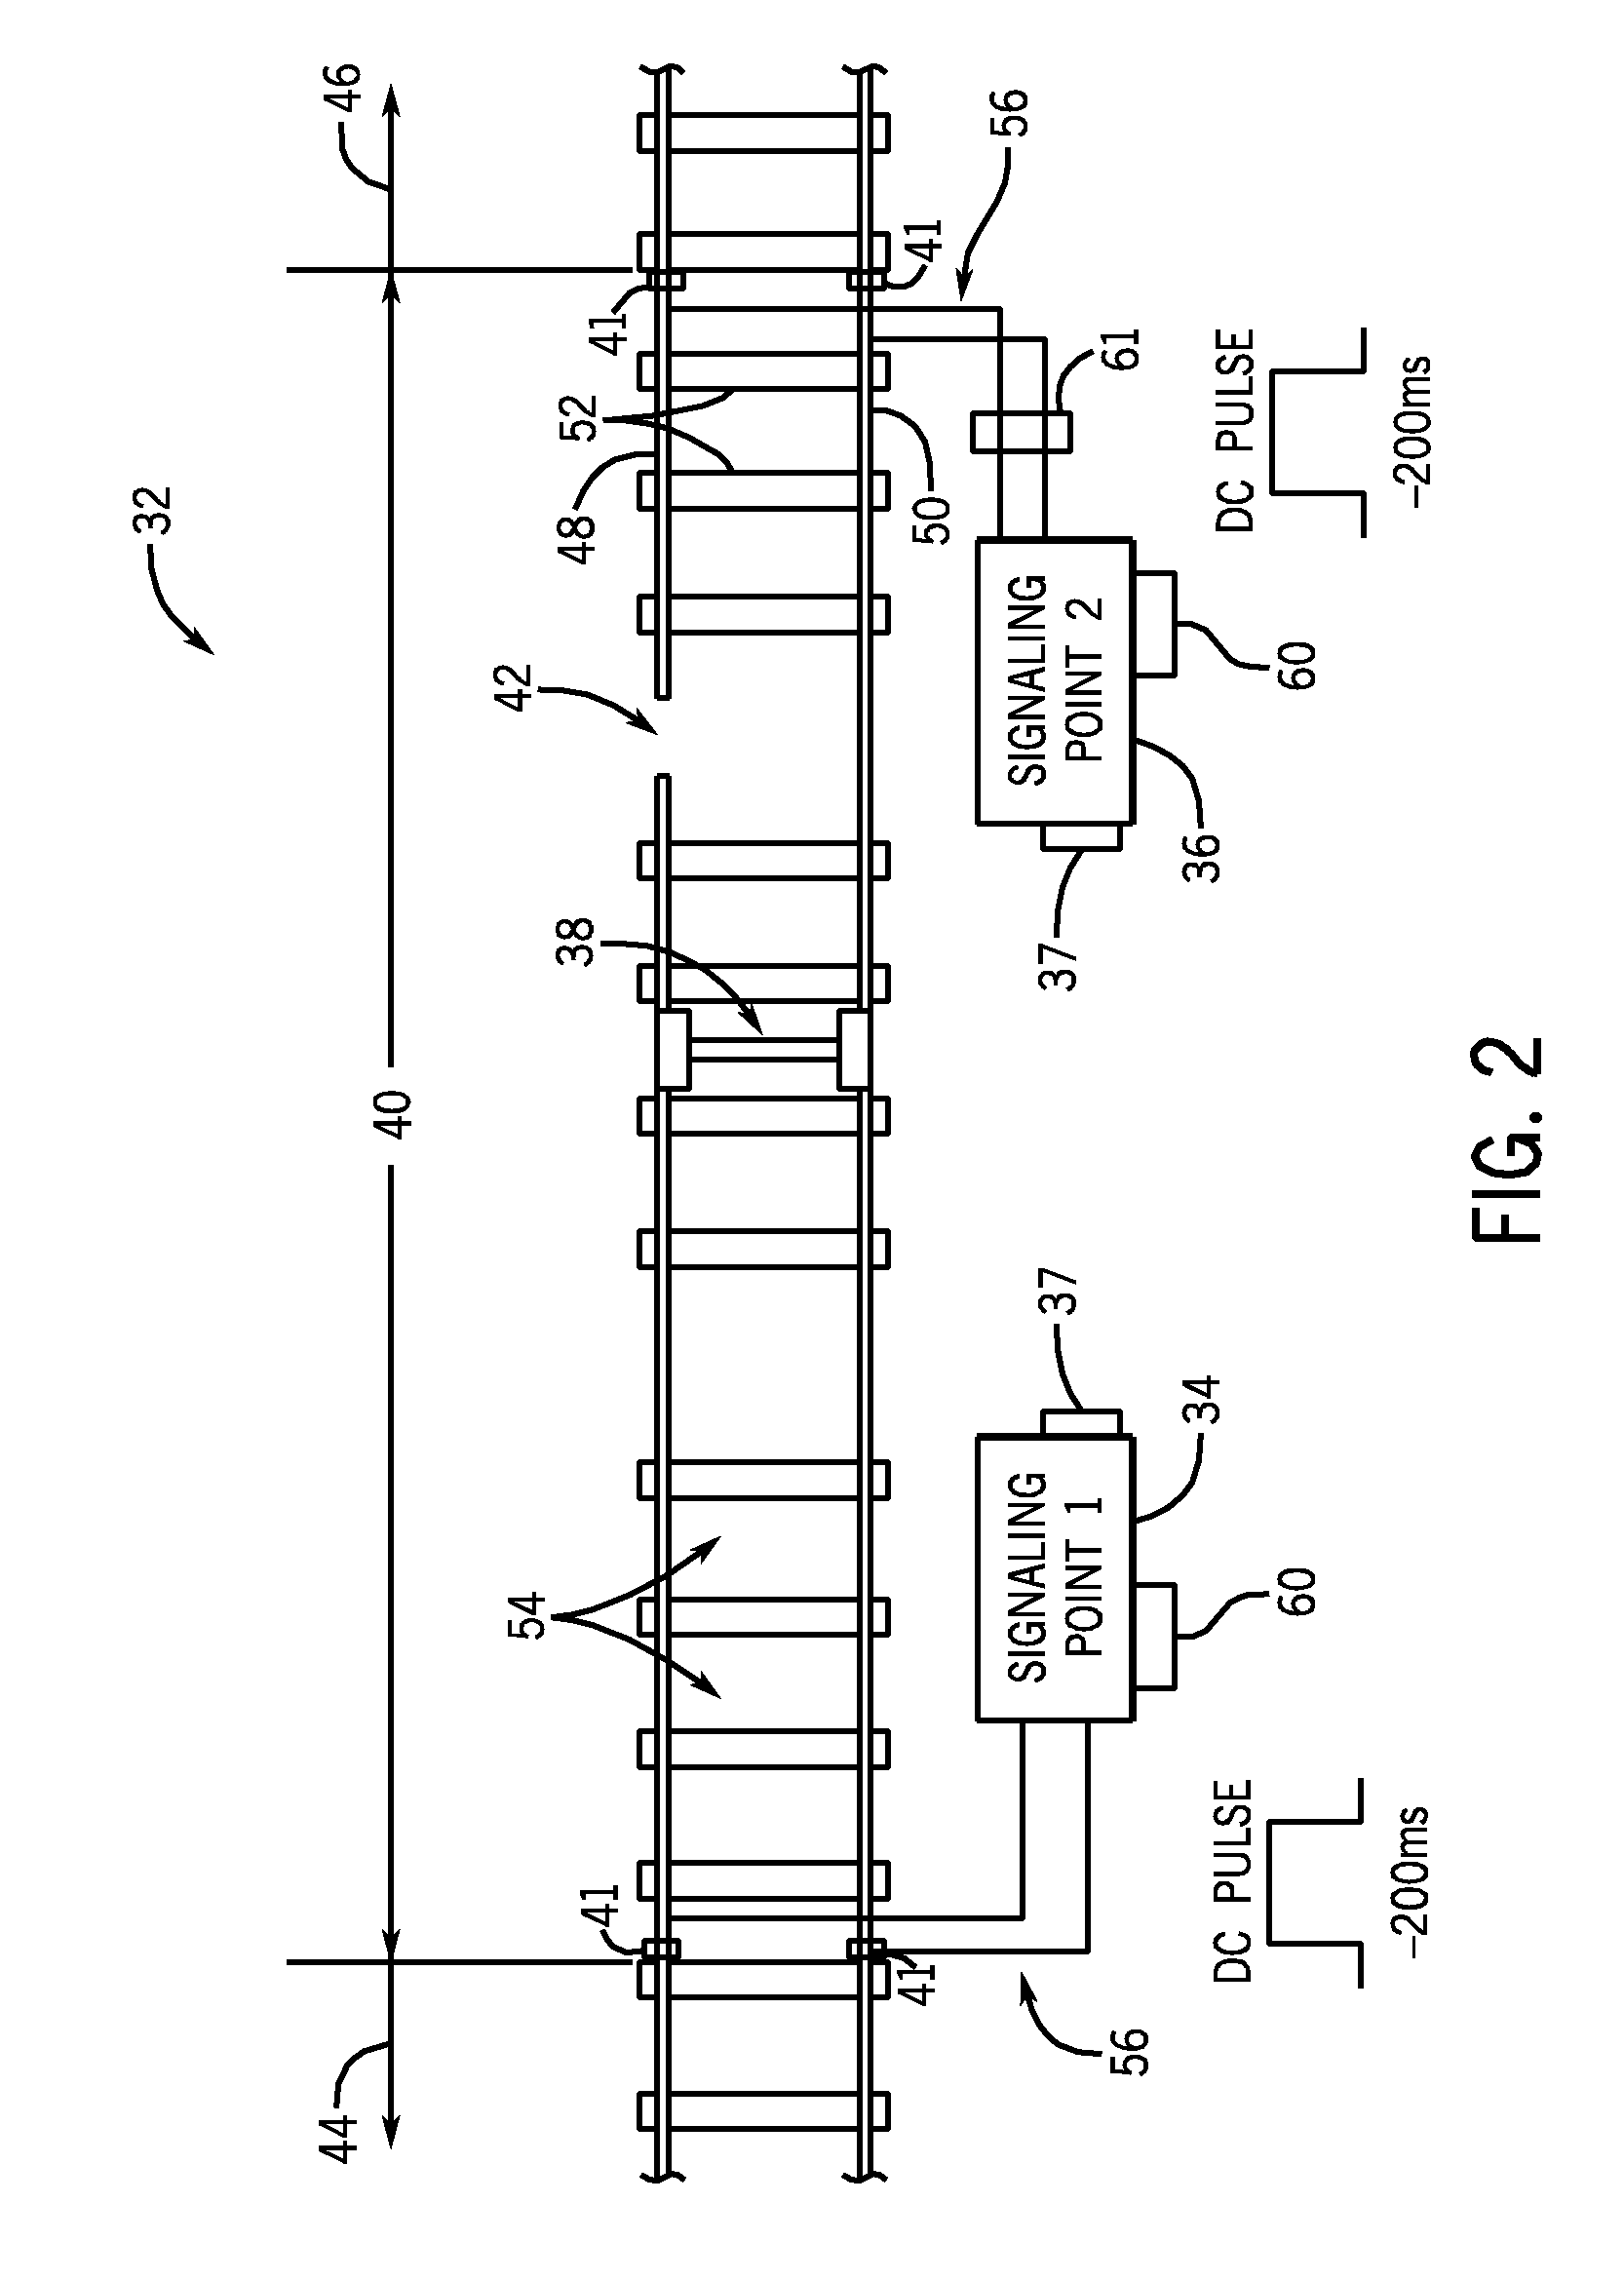 Communication system, apparatus and method